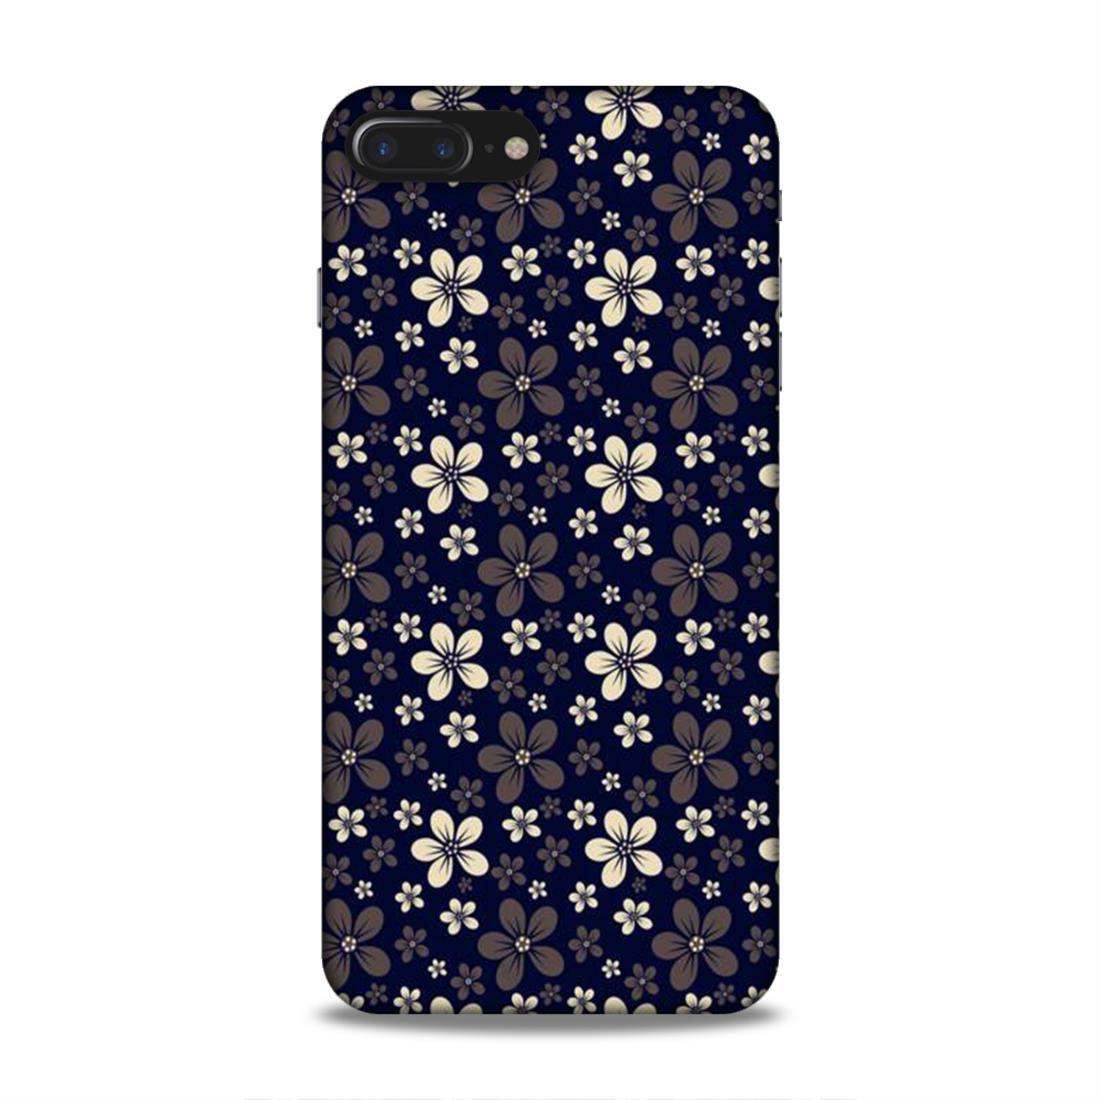 Small Flower Art iPhone 7 Plus Phone Back Cover